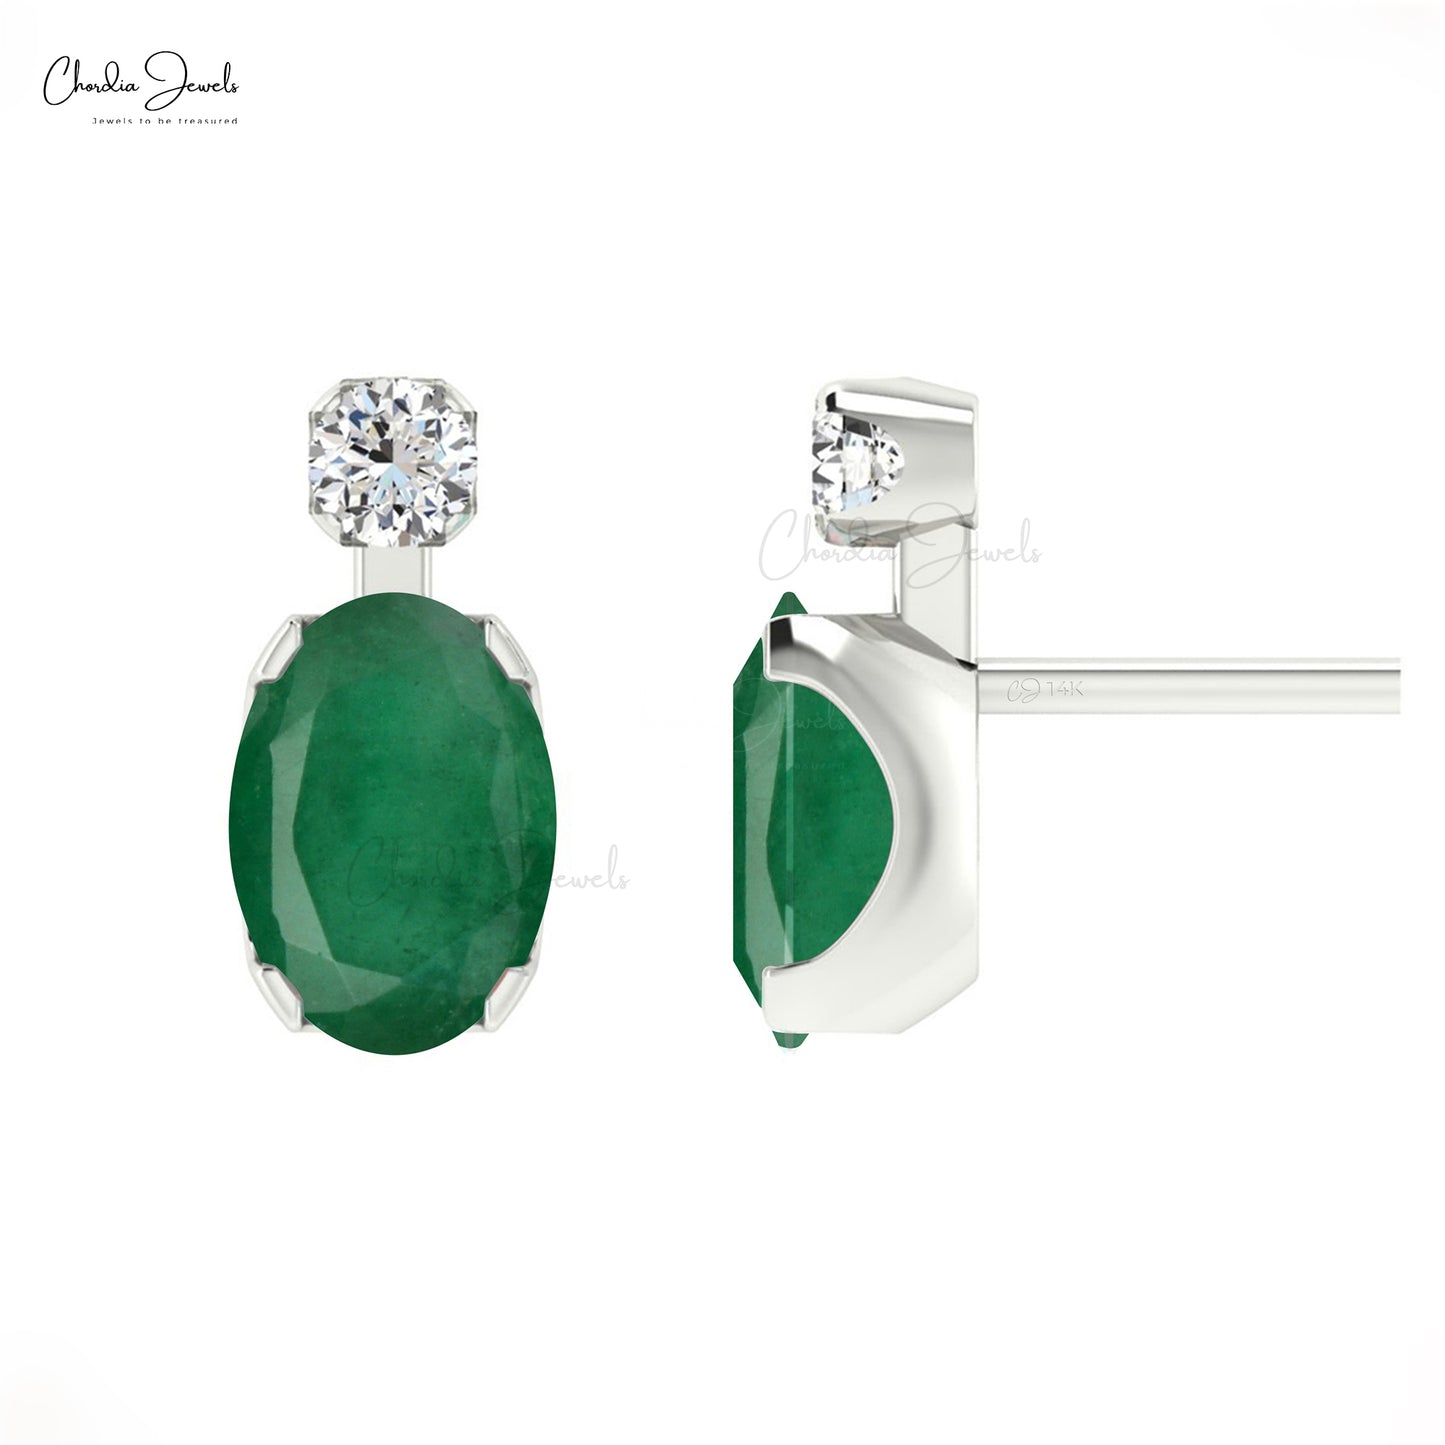 Transform your style with these natural emerald earrings.